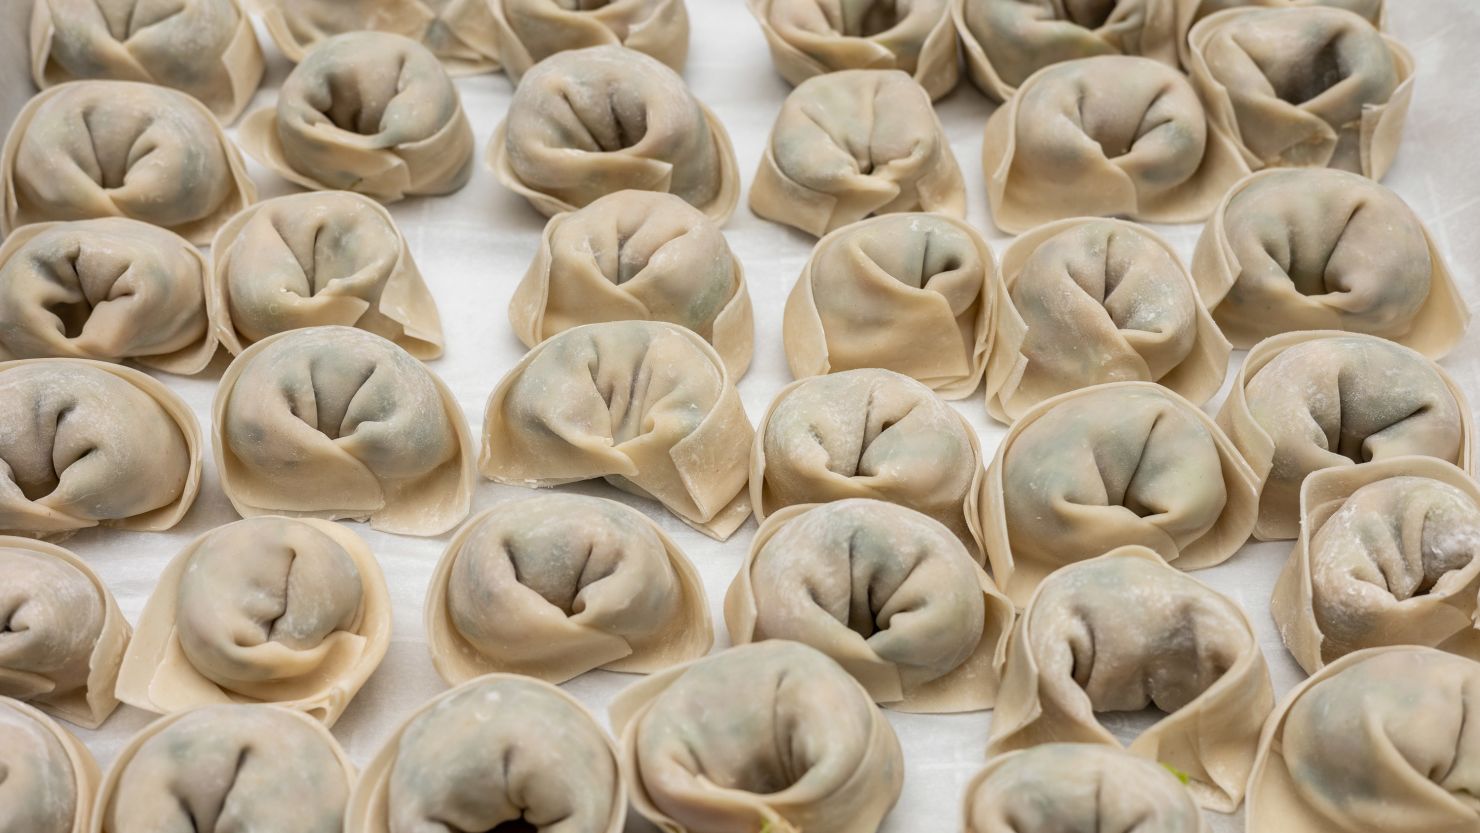 The challenge reportedly involved patrons competing to eat 108 chaoshous, or spicy wonton dumplings, as quickly as possible to win a free meal and additional prizes.  